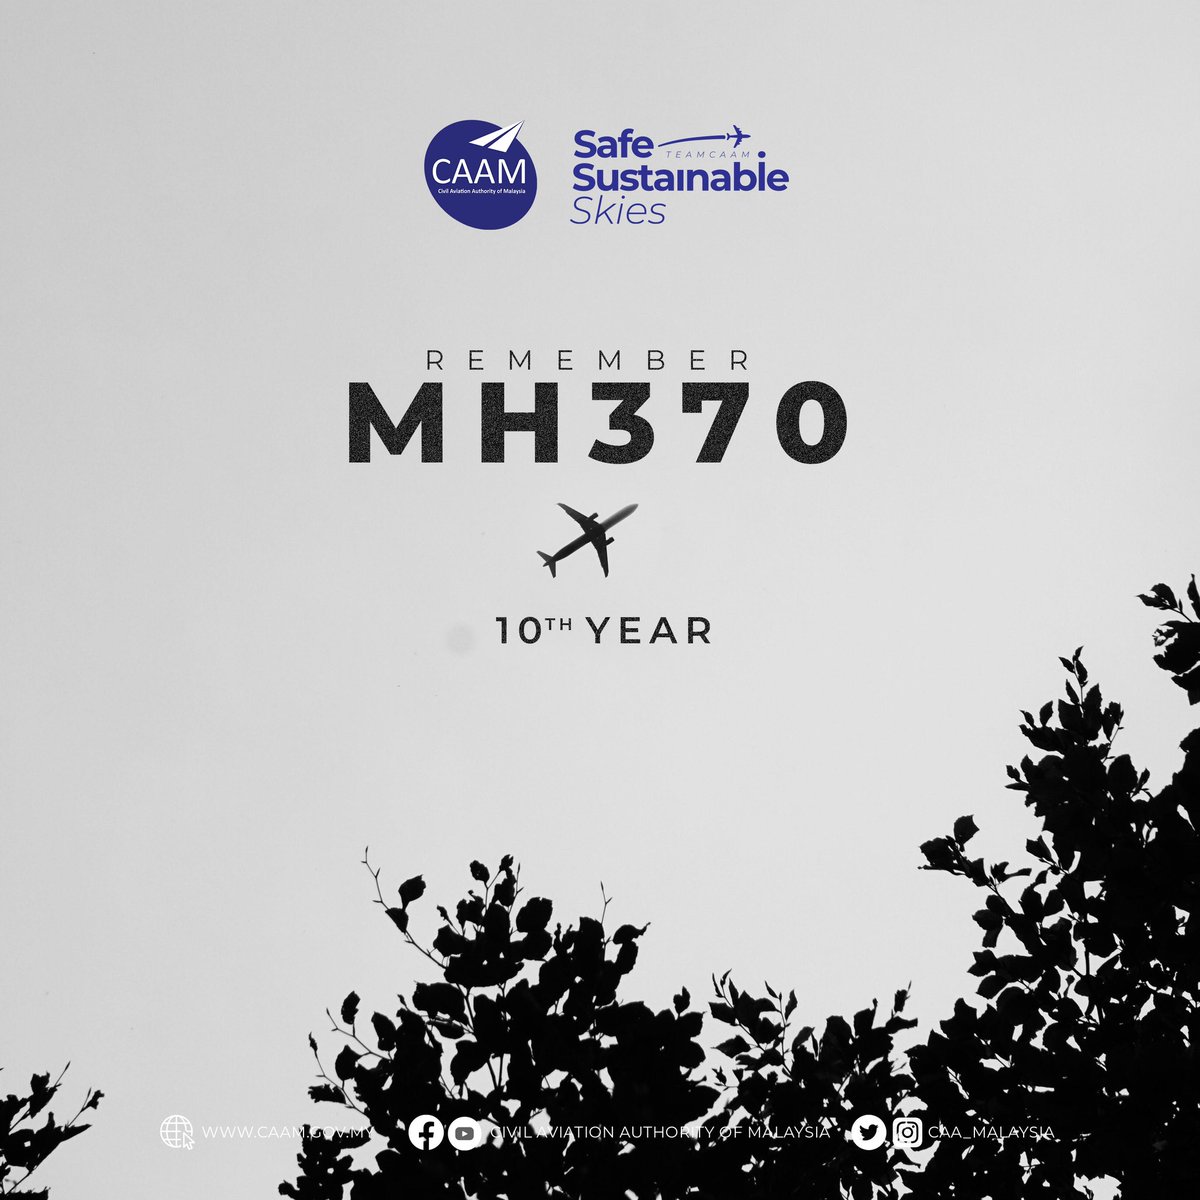 A decade has passed, yet our hearts remain with the tragedy of #MH370. CAAM wishes to extend sincere condolences to all families affected by this profound loss. In the skies and in our hearts, their story lives on. #TeamCAAM #RememberingMH370